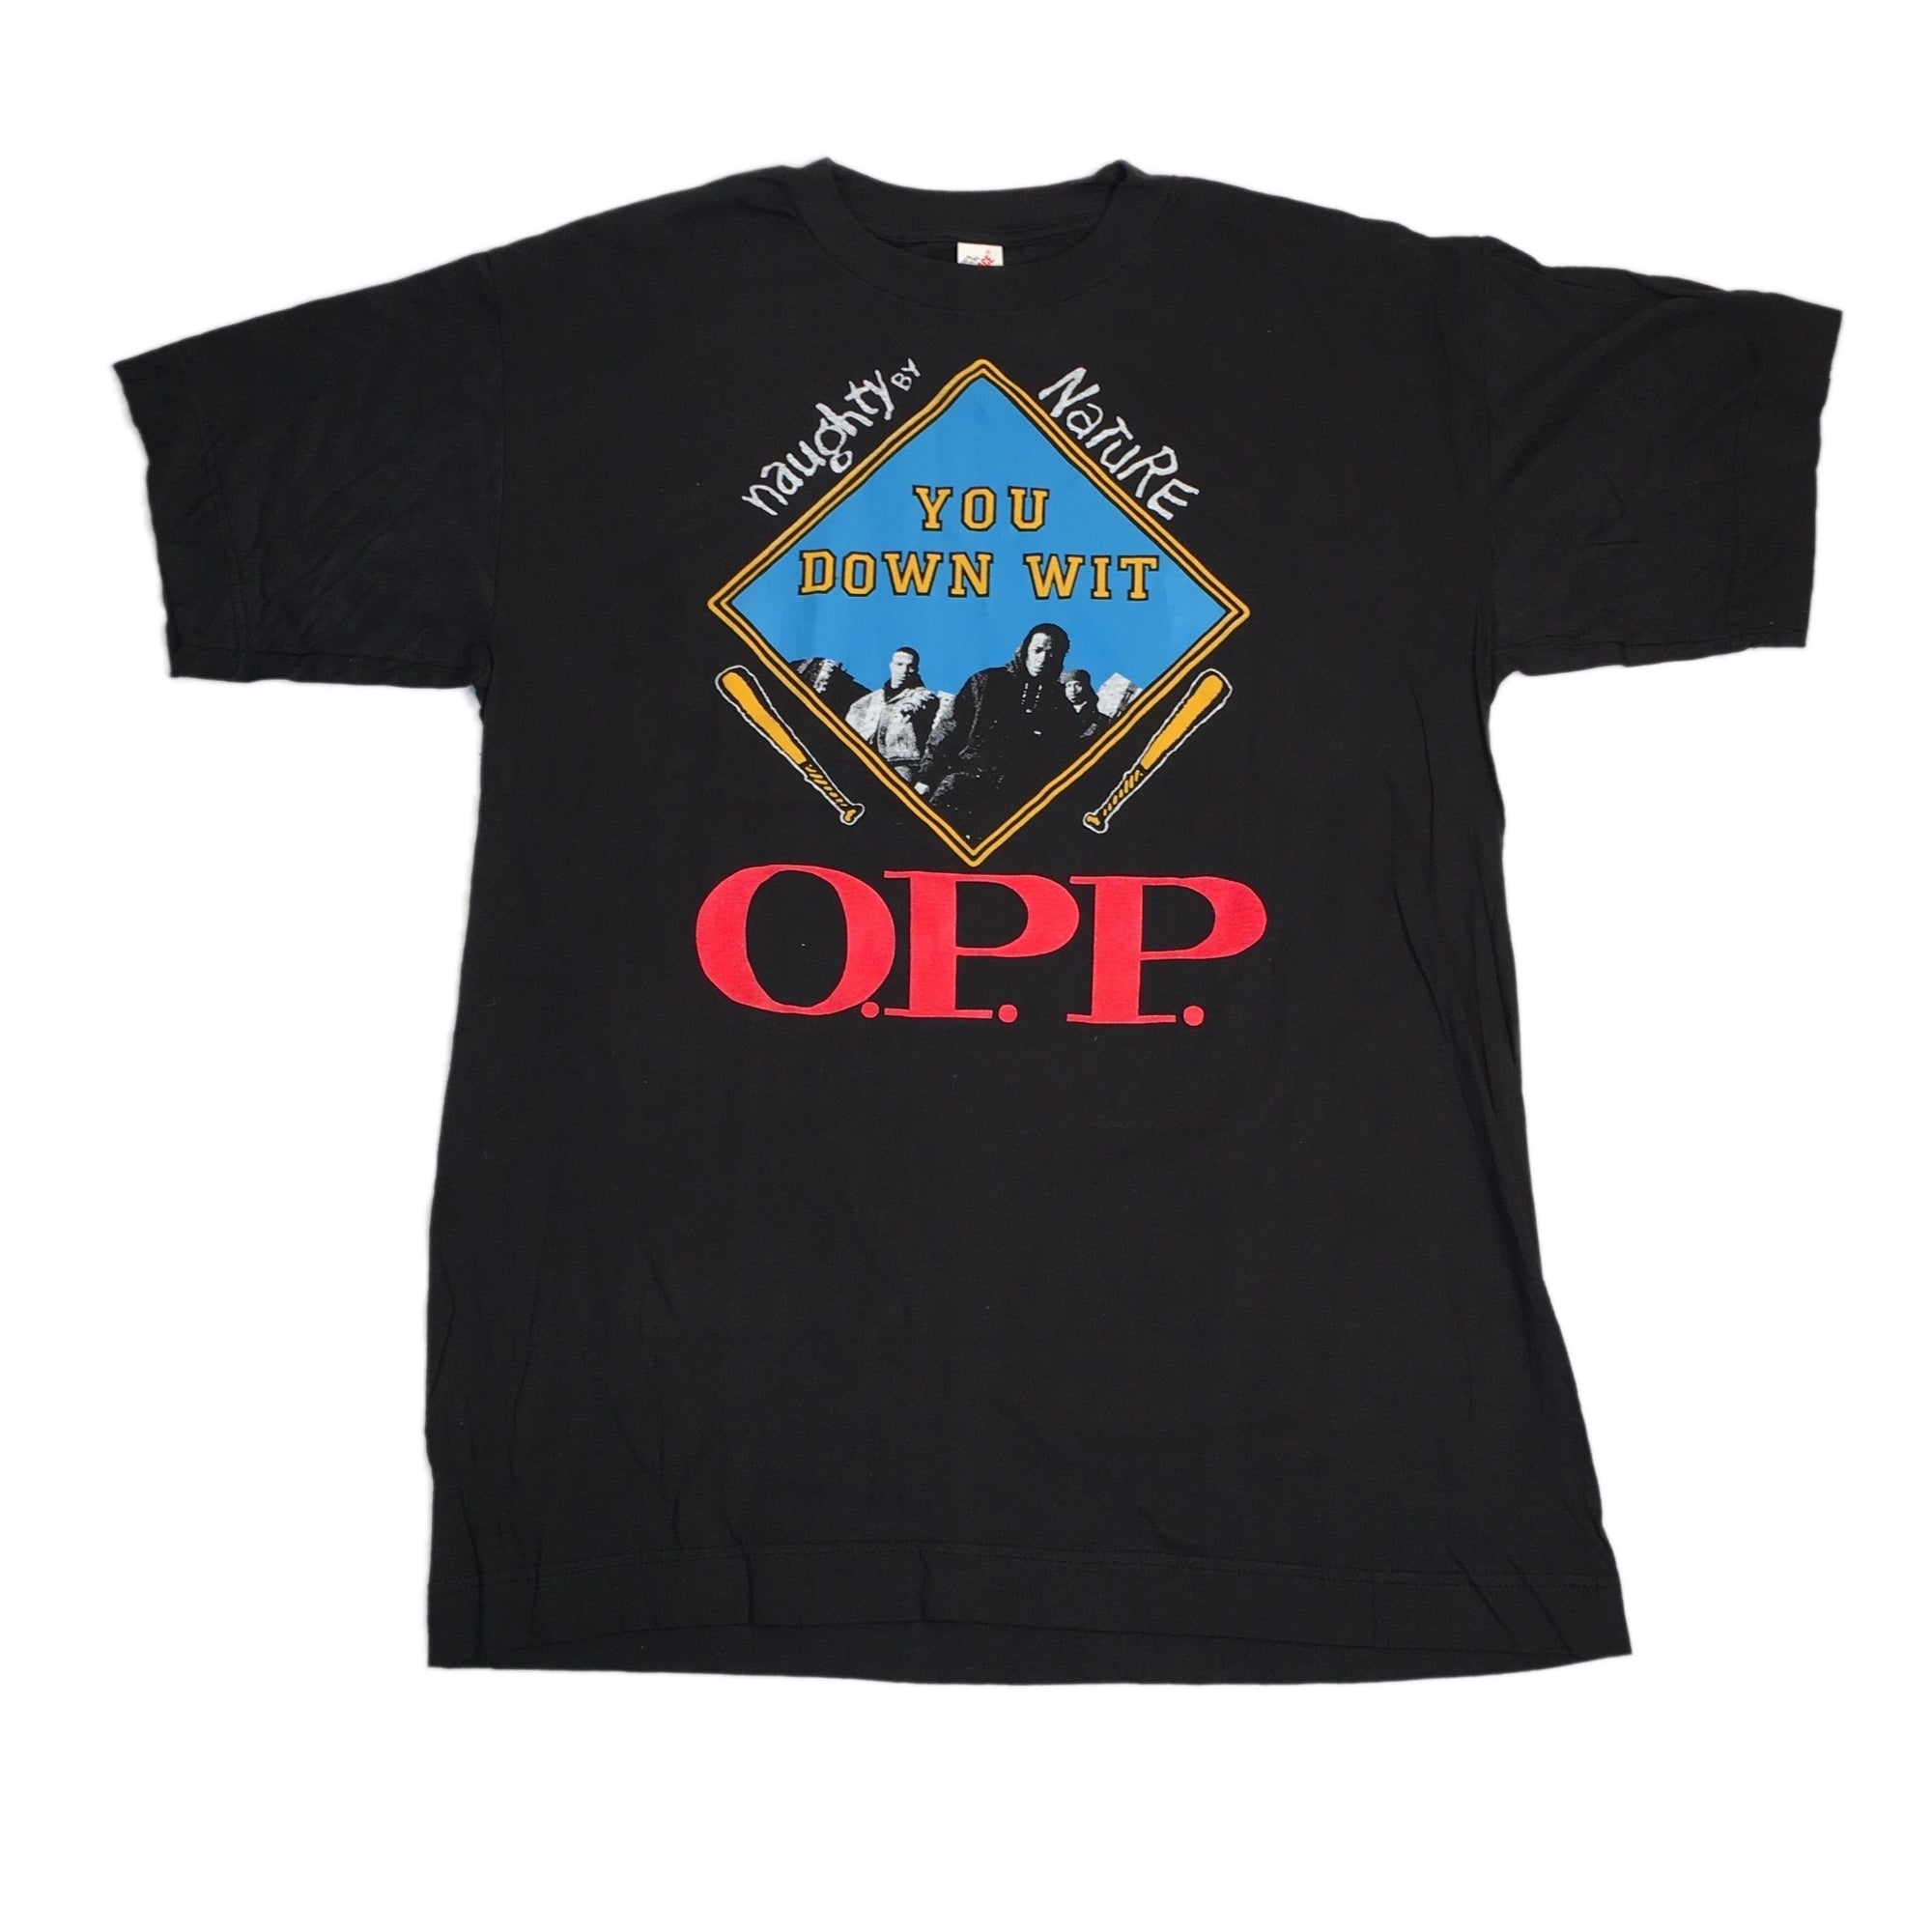 Vintage Naughty By Nature "OPP" T-Shirt - jointcustodydc